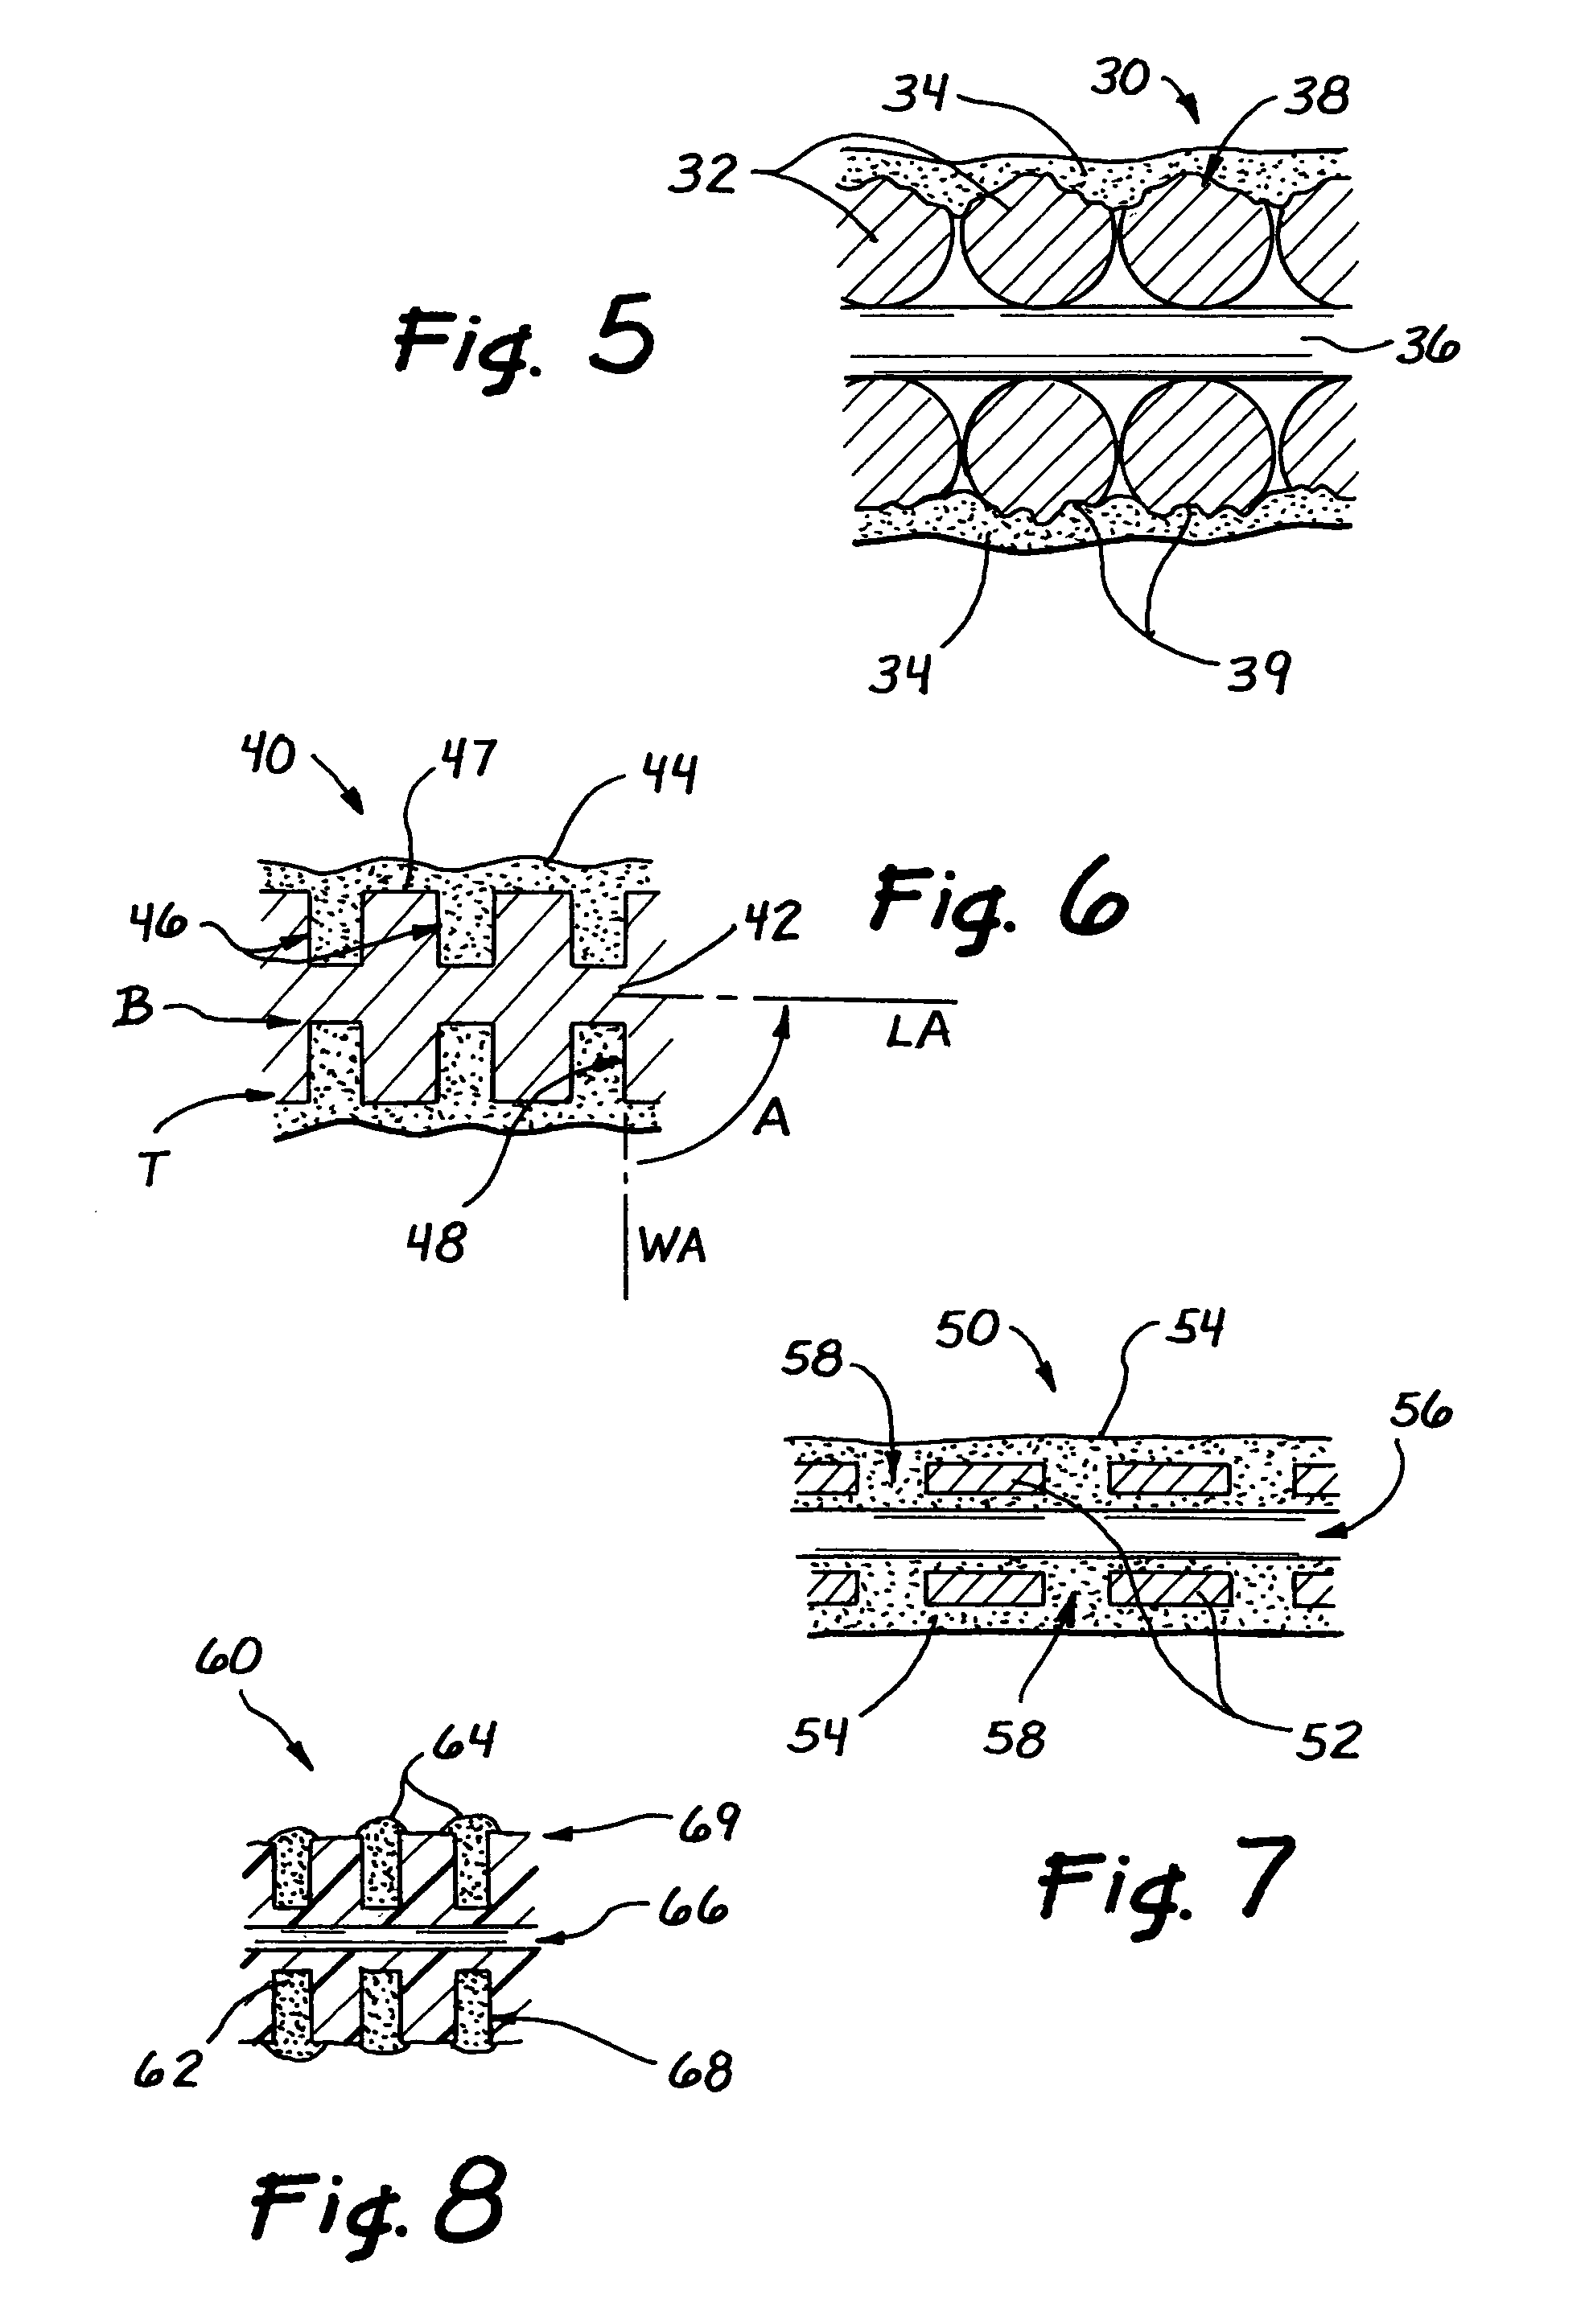 Medical devices having full or partial polymer coatings and their methods of manufacture